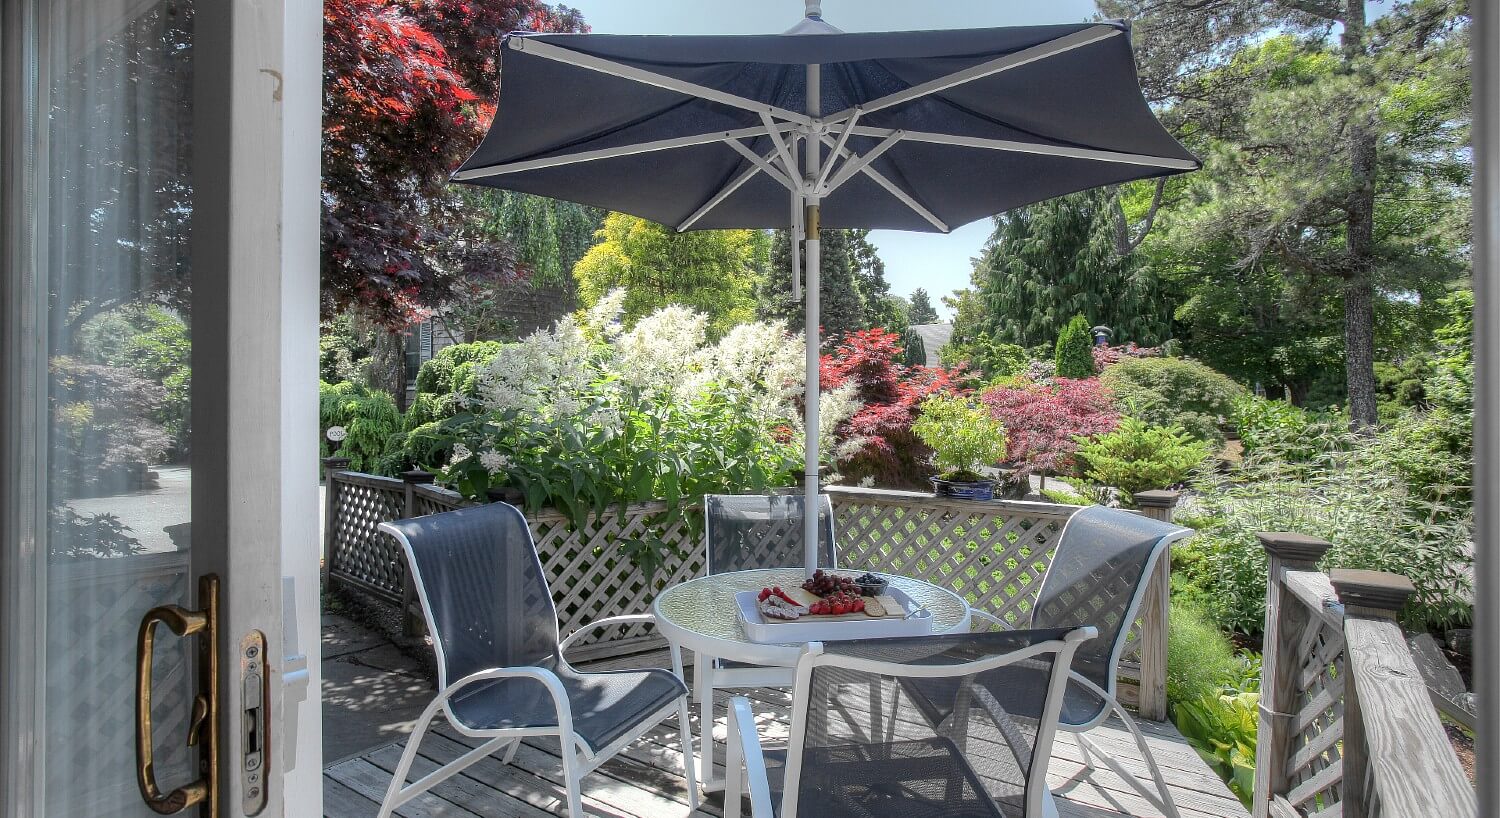 Outdoor deck with patio table, four chairs and umbrella surrounded by lush colorful bushes